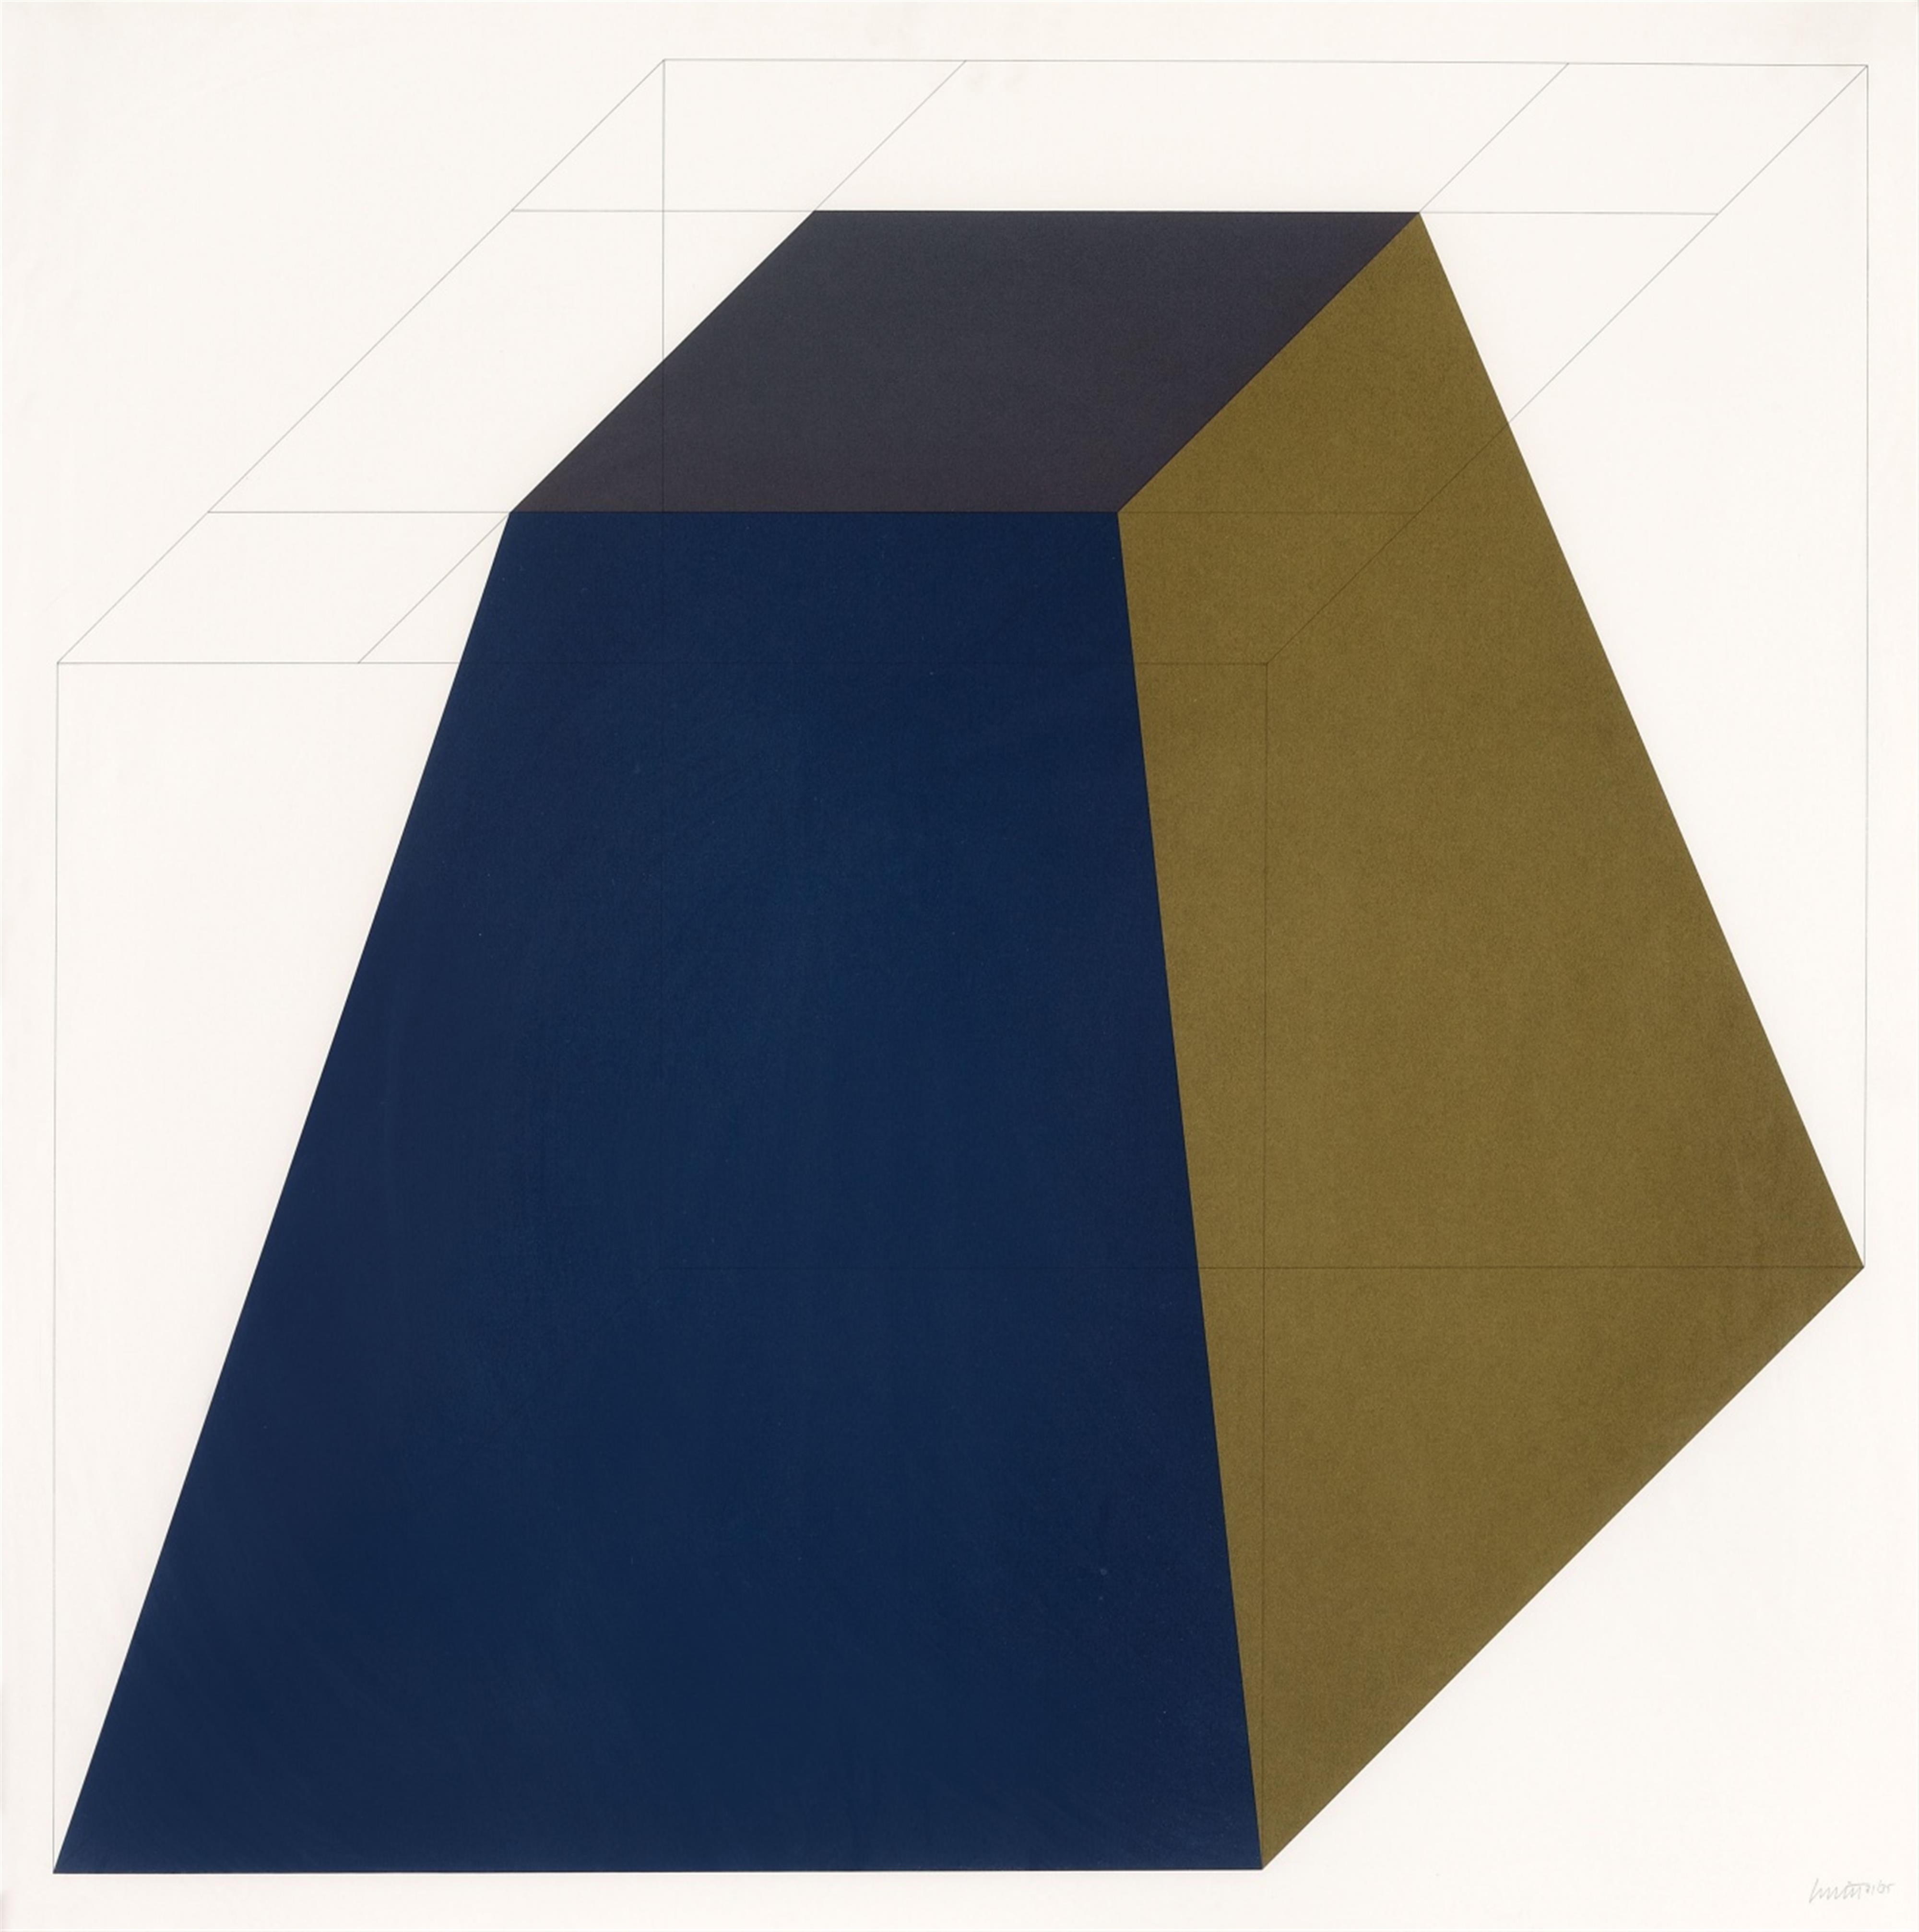 Sol LeWitt - Forms derived from a Cube (Colors Superimposed) - image-1